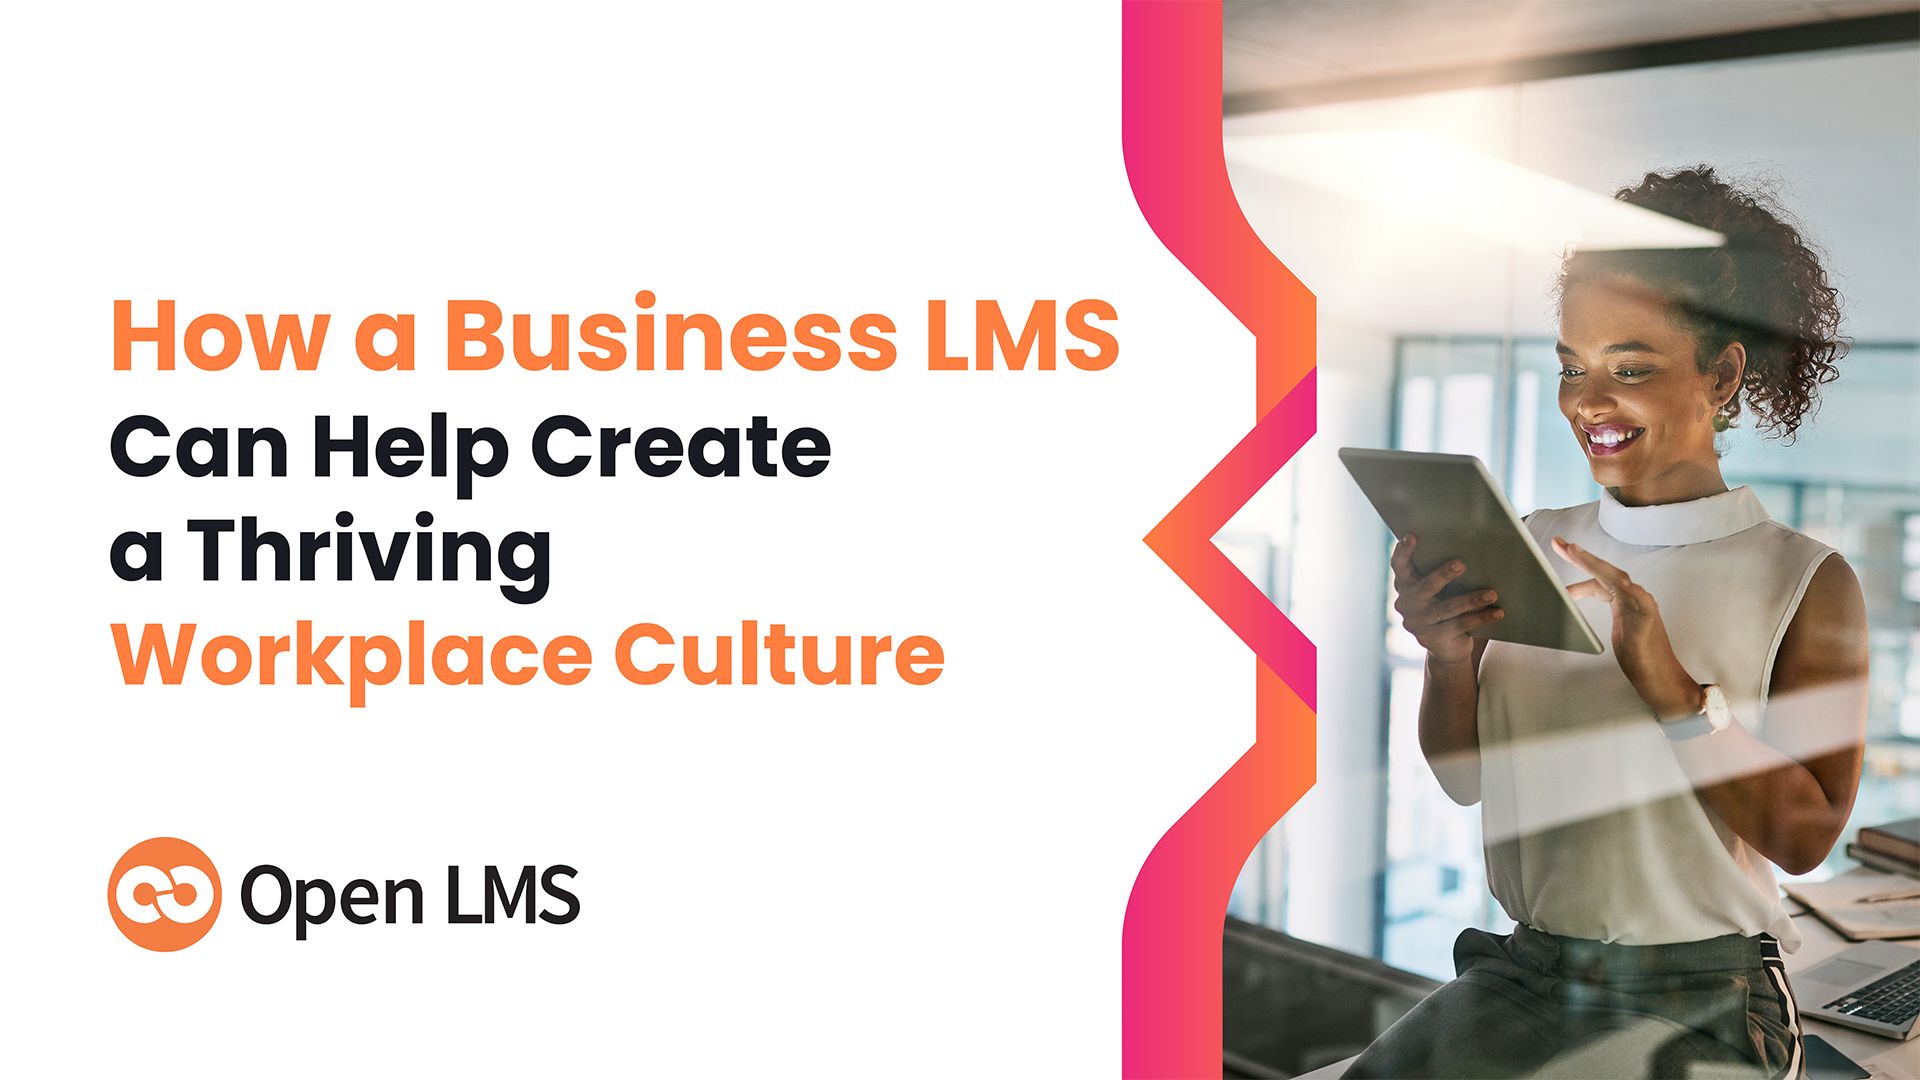 How a Business LMS Can Help Create a Thriving Workplace Culture